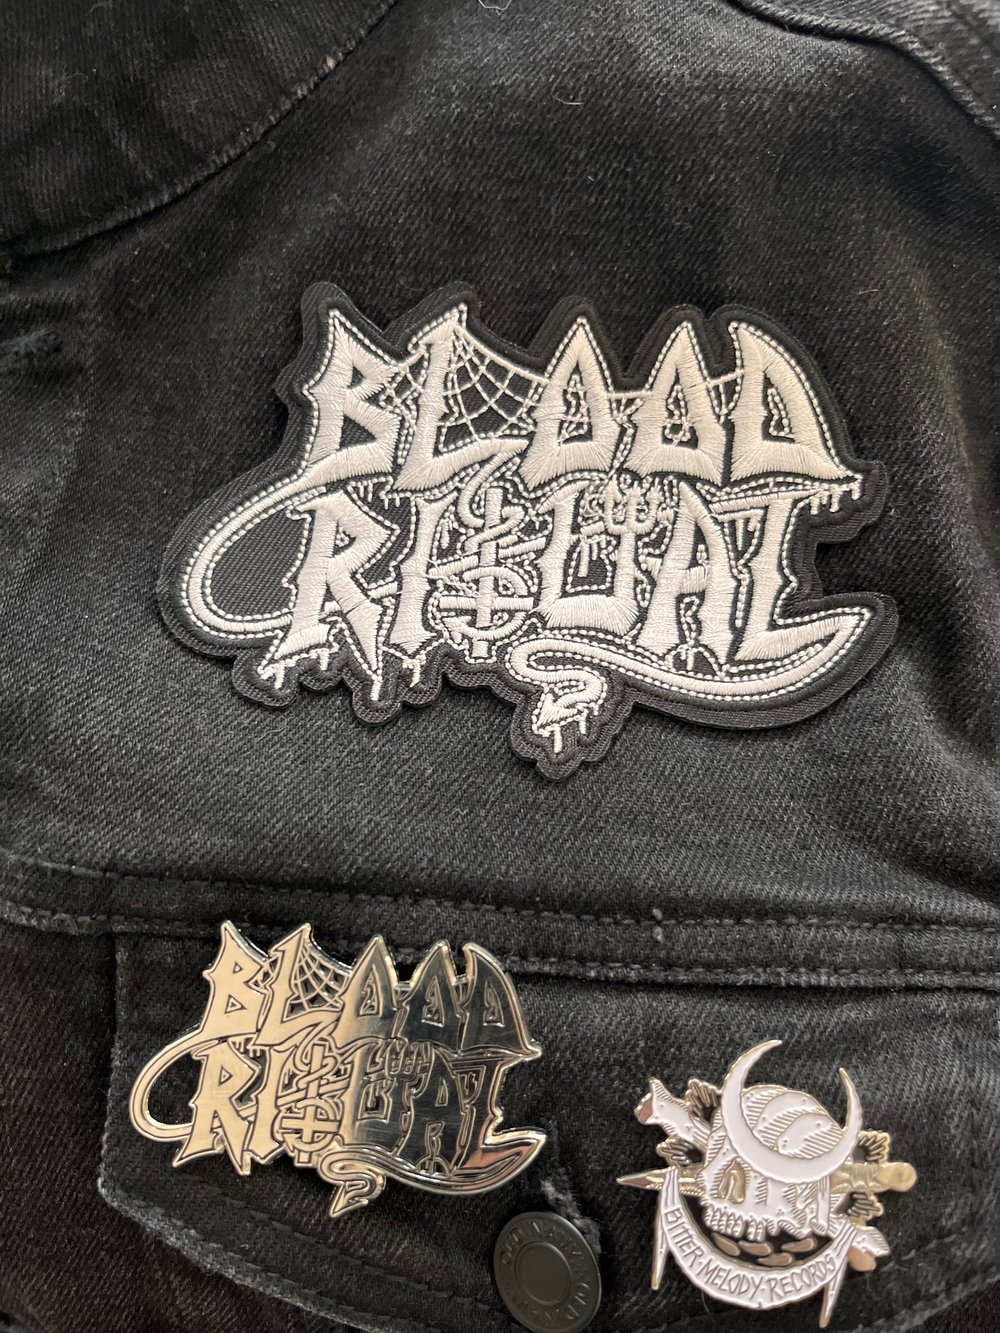 Blood Ritual - Embroidered patch 